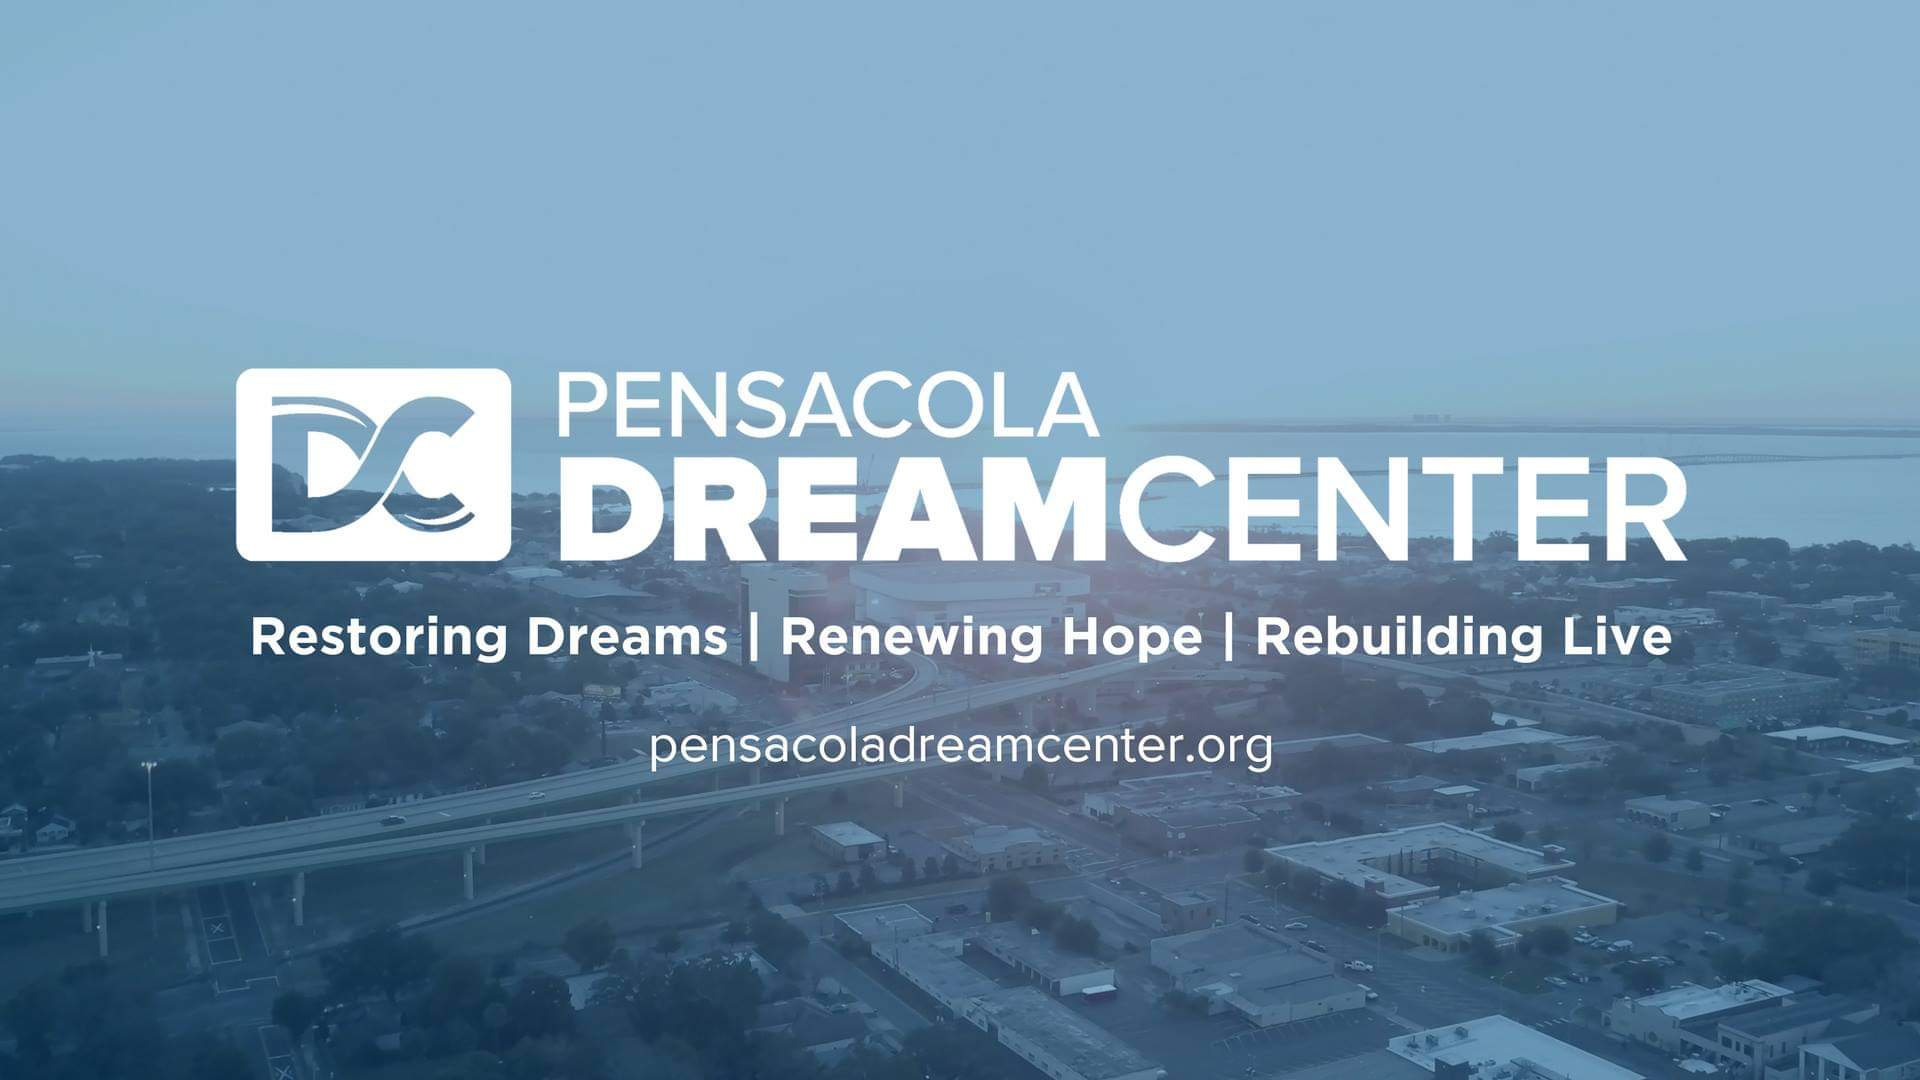 The Pensacola Dream Center Is In Need of Community Partners To Help Resolve Client Issues